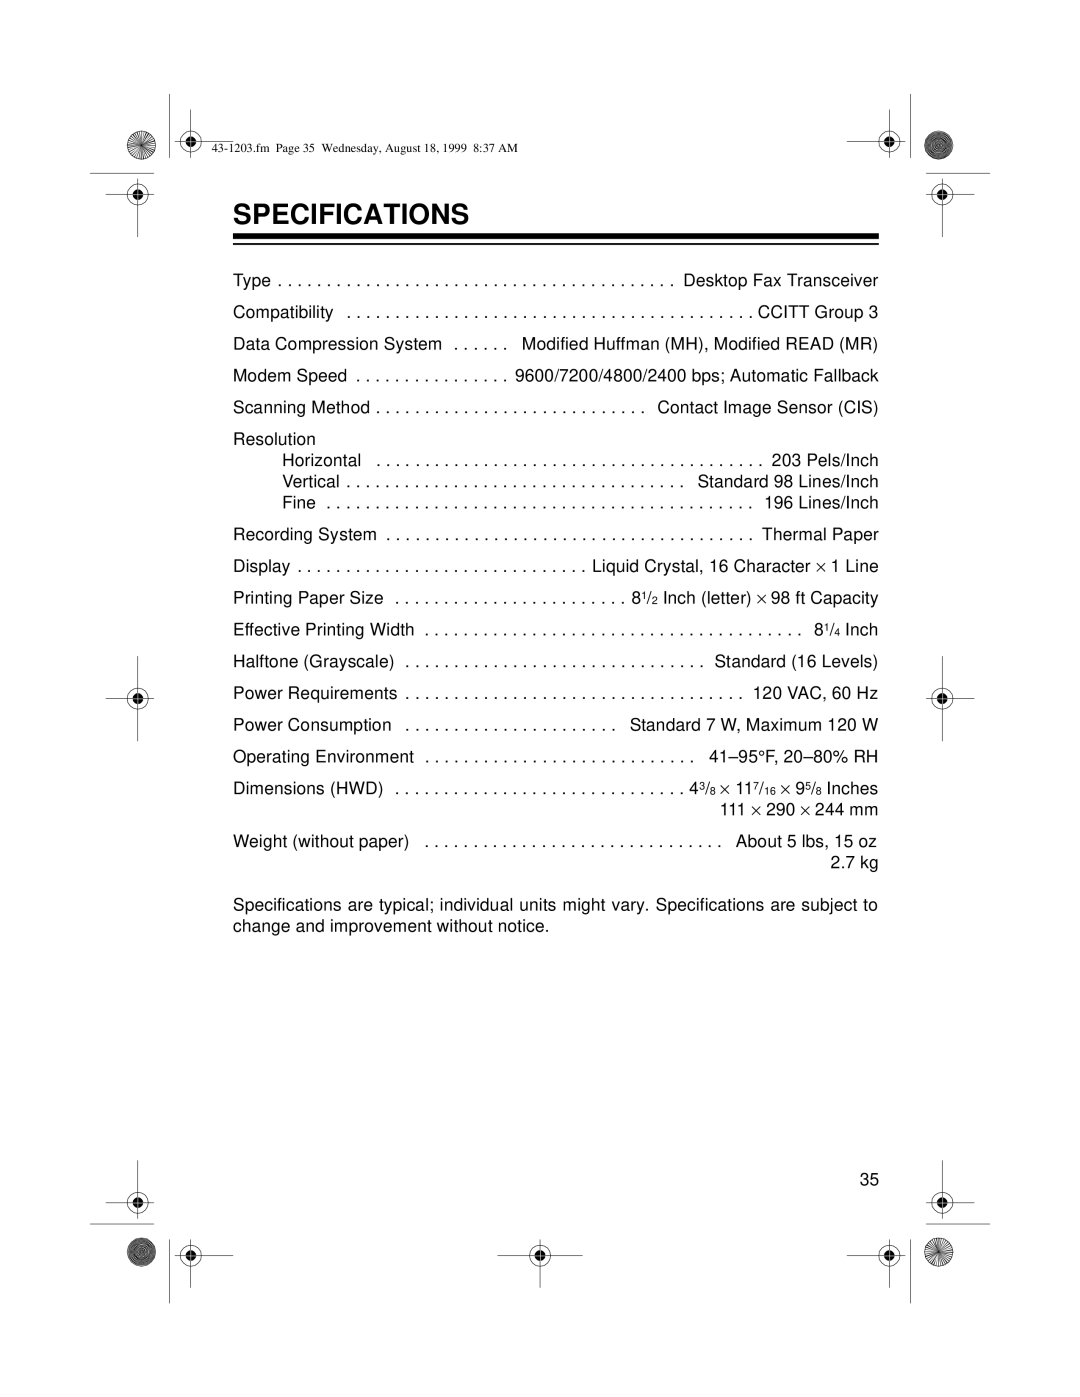 Radio Shack TFX-1031 owner manual Specifications 